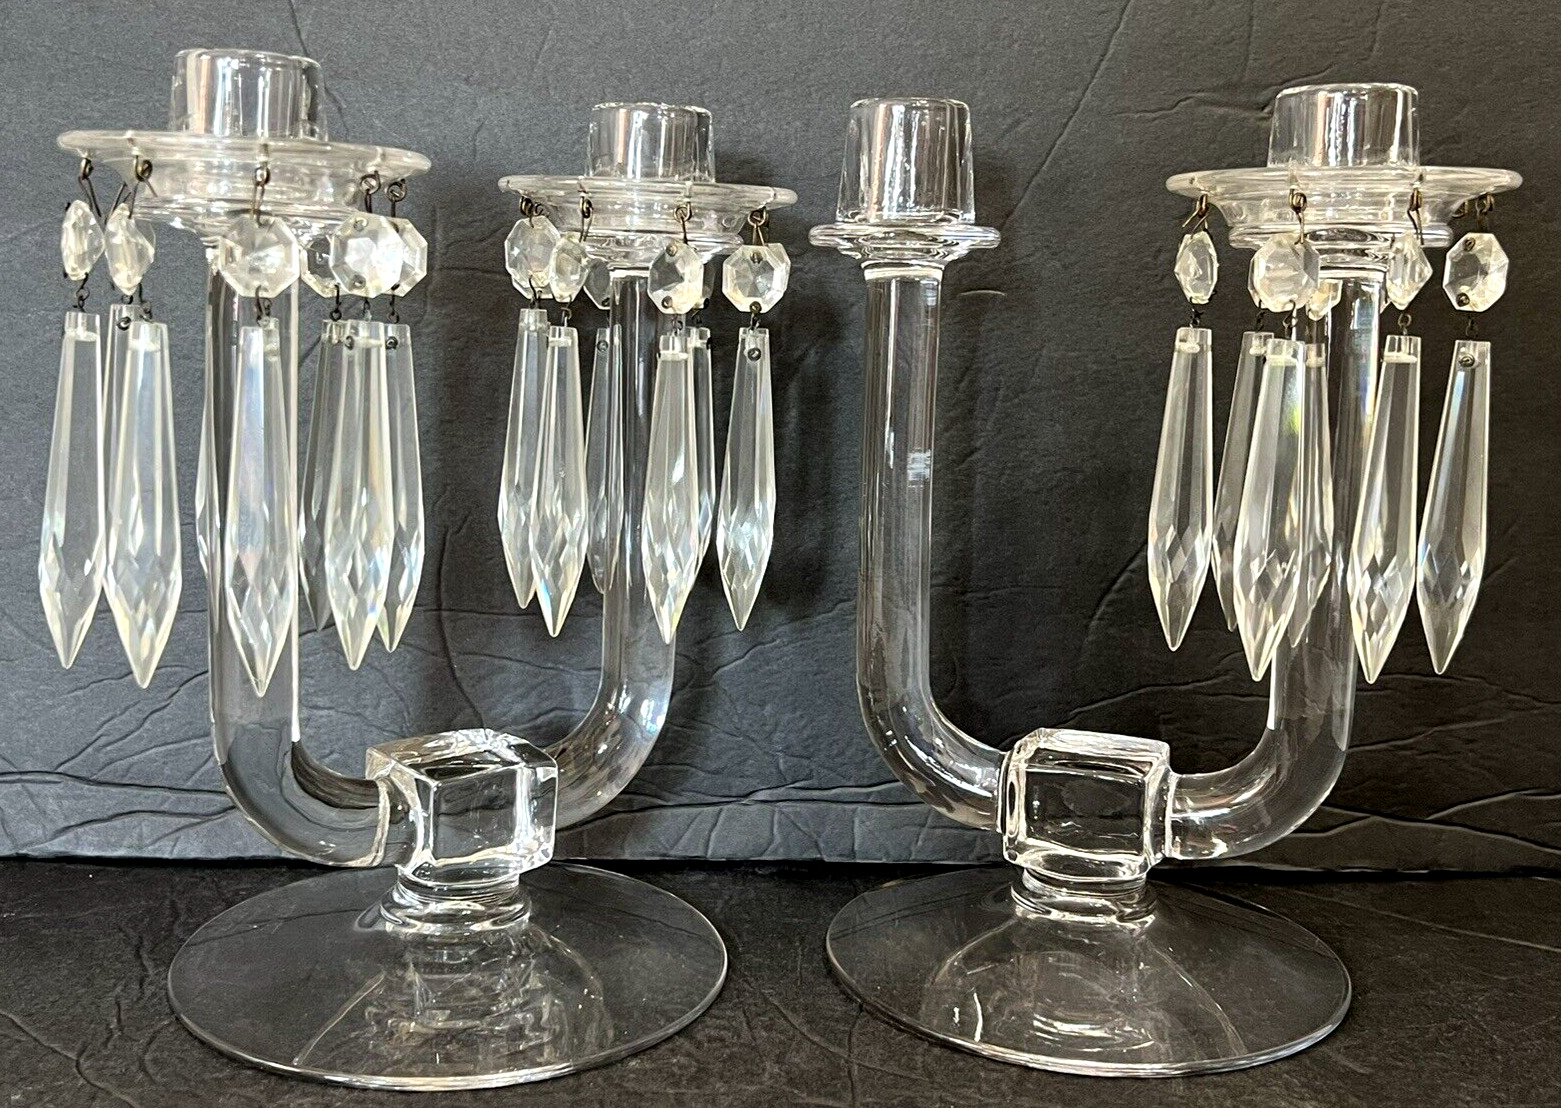 PAIR GLASS CANDELABRA CANDLESTICK HOLDERS W/BOBECHES AND PRISMS VINTAGE BAROQUE